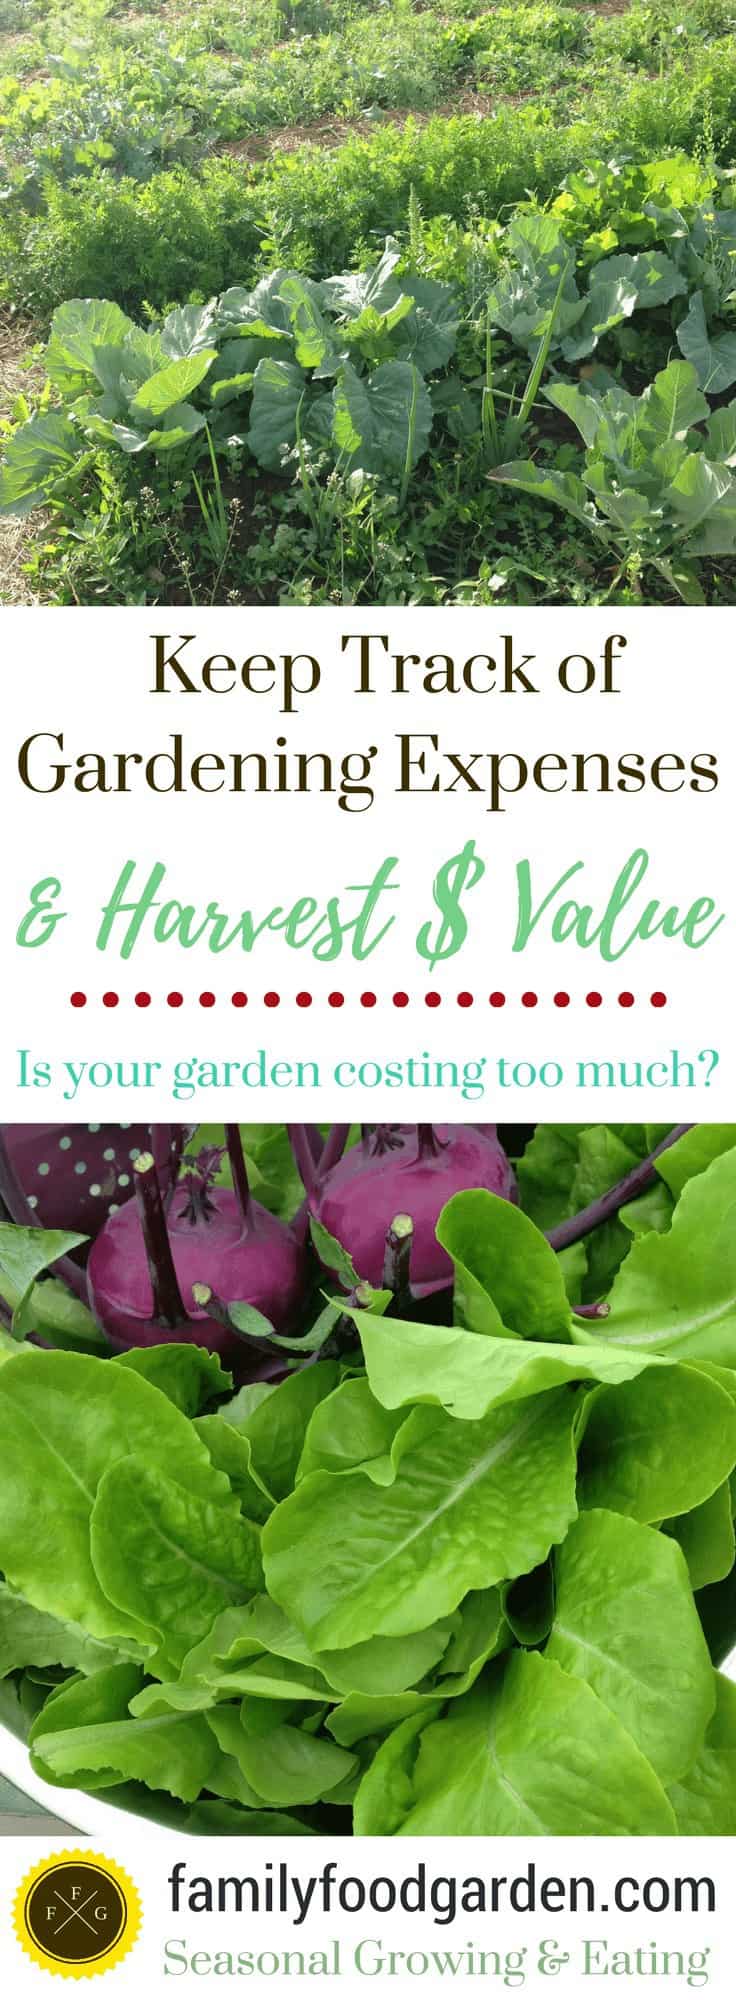 Keeping track of gardening expenses + harvests